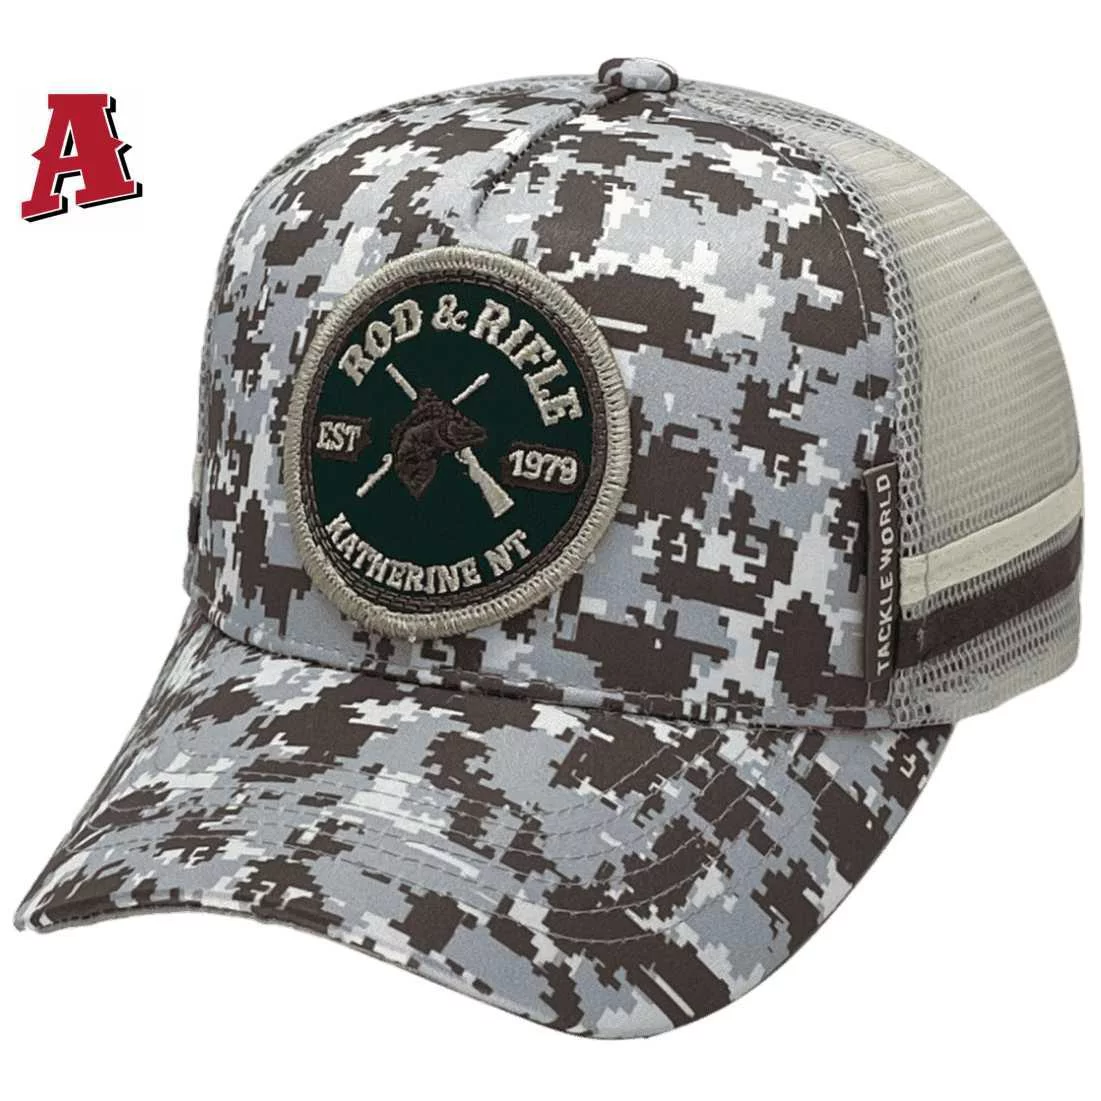 Rod & Rifle Katherine NT Sublimated Digital Camo LP Midrange Aussie Trucker Hat with Double Side Bands and Australian Head Fit Crown Grey Cream Brown